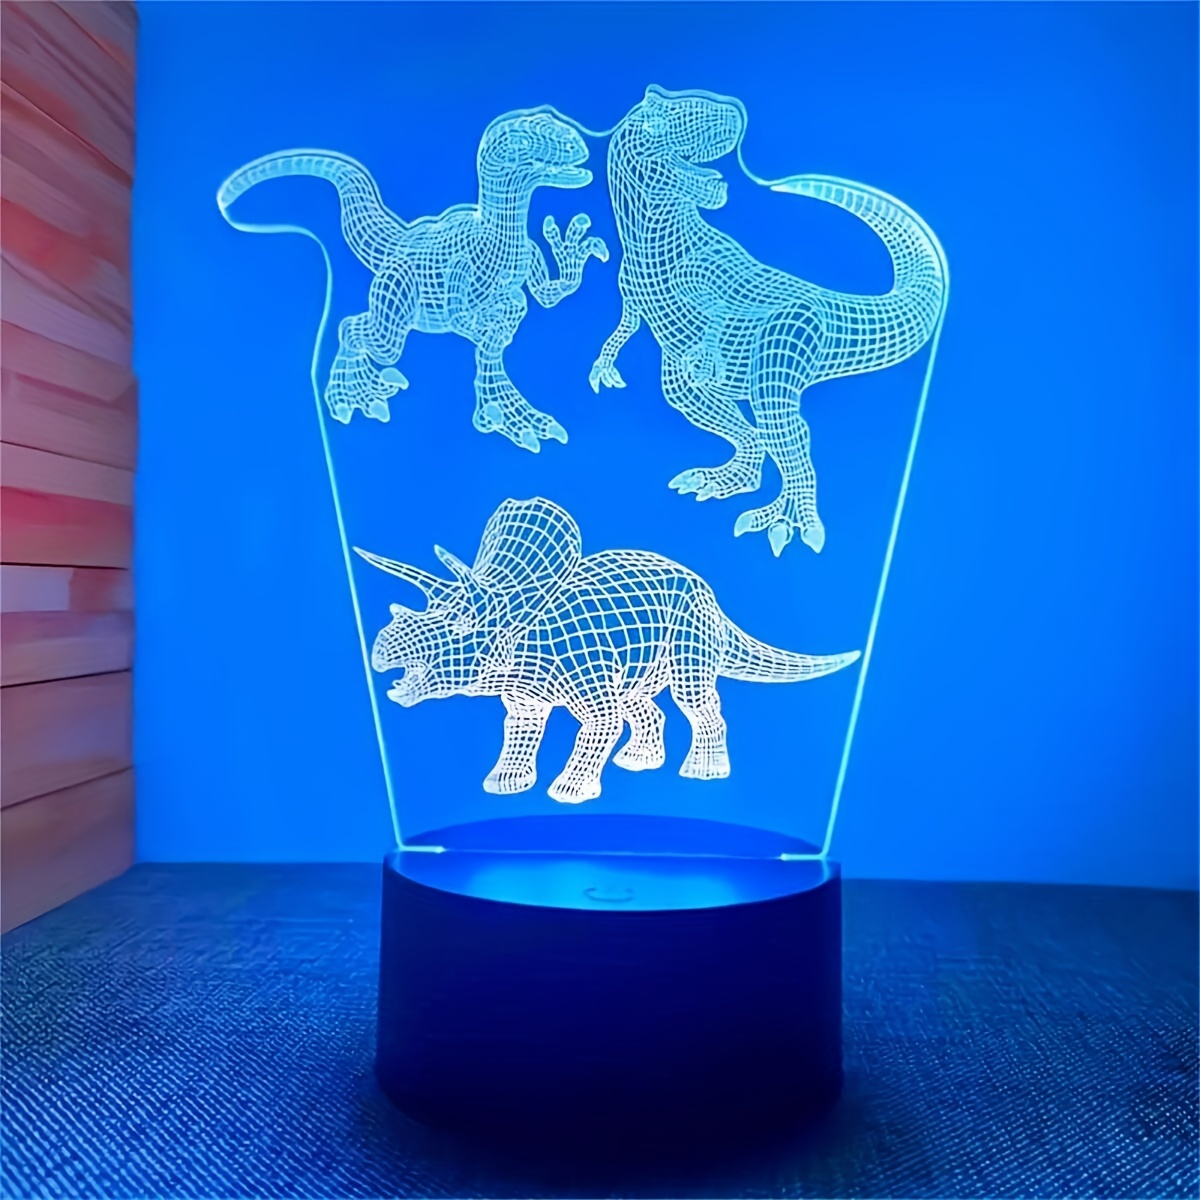 

1pc 3d Acrylic Plate Night Light, Dinosaur Shape Bedside Small Table Lamp, Black Touch 7 Colors Led Indicator Mini Led Small Table Lamp, Christmas Gift Holiday Gift Birthday Gift